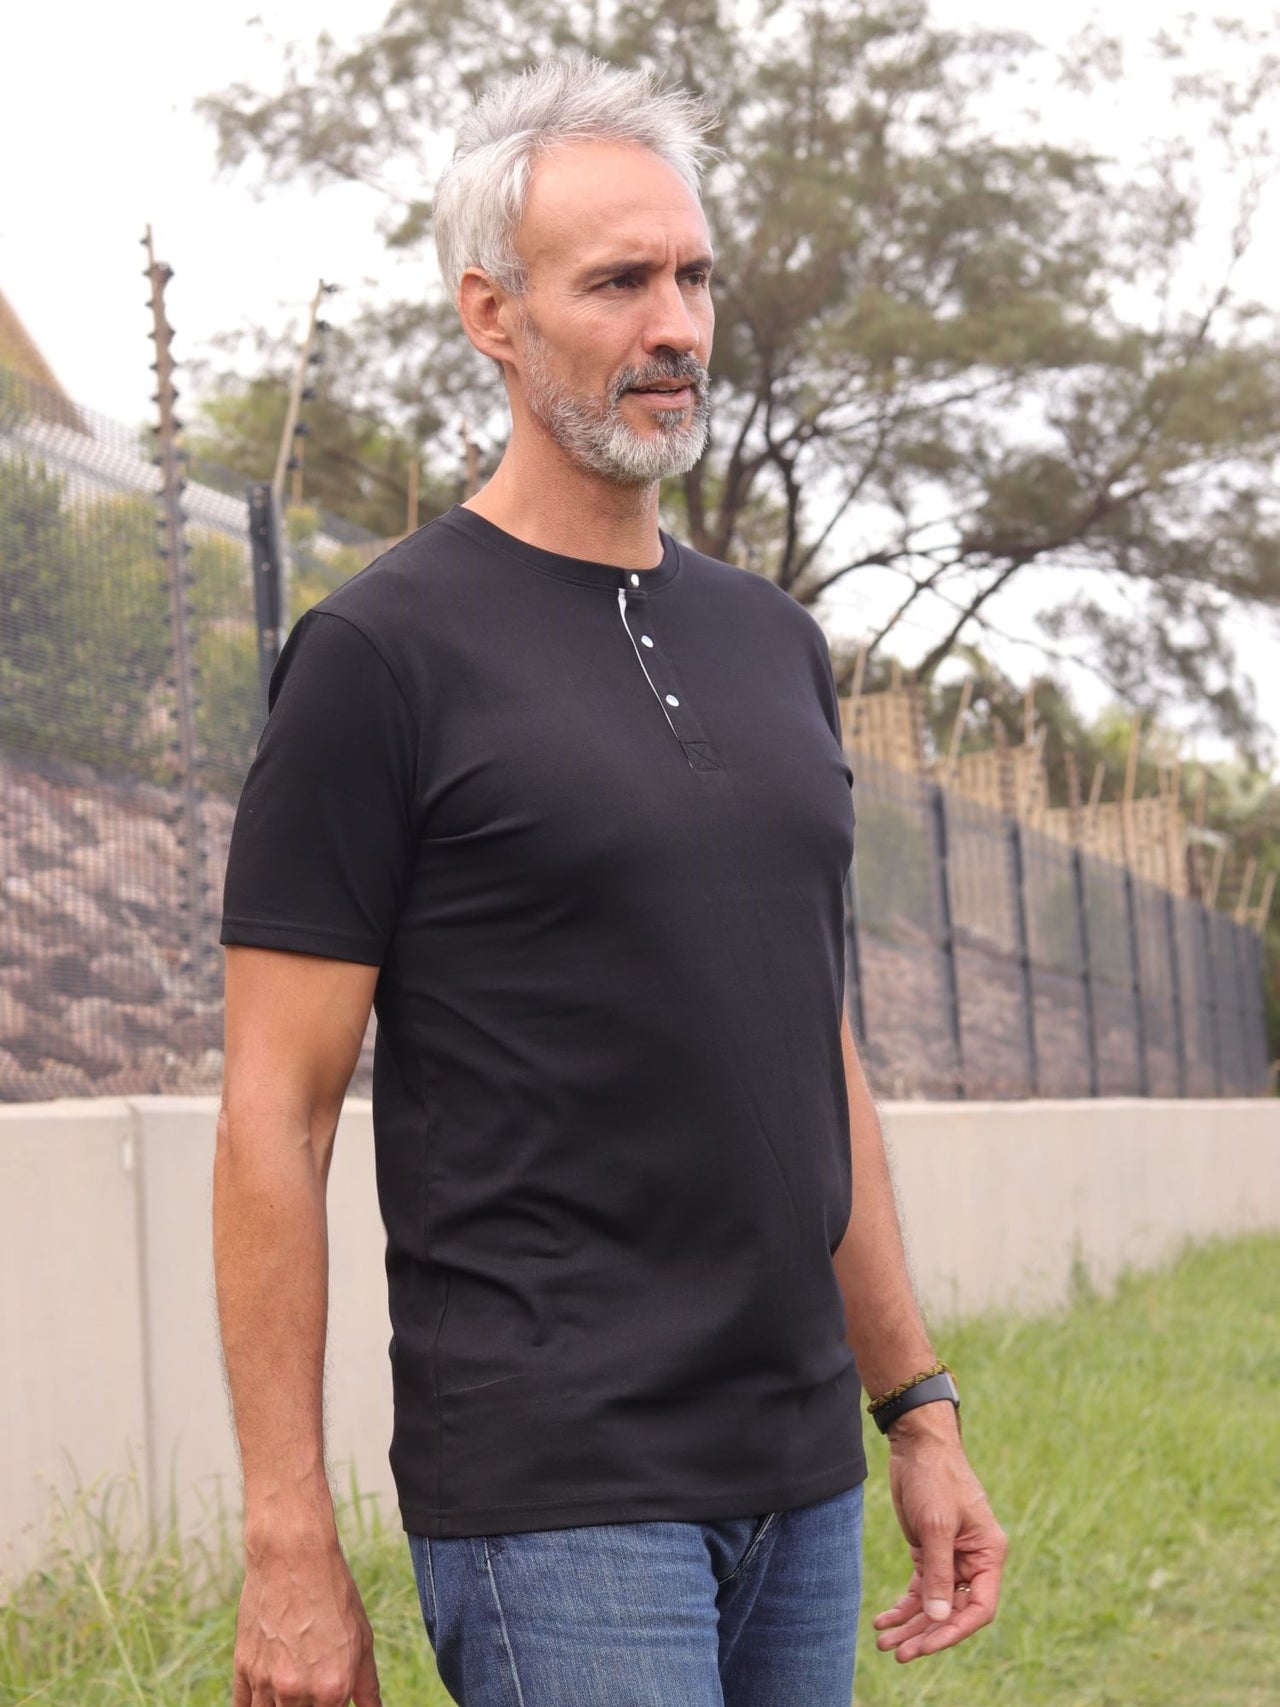 A tall skinny guy wearing a tall black henley shirt and looking to the right.